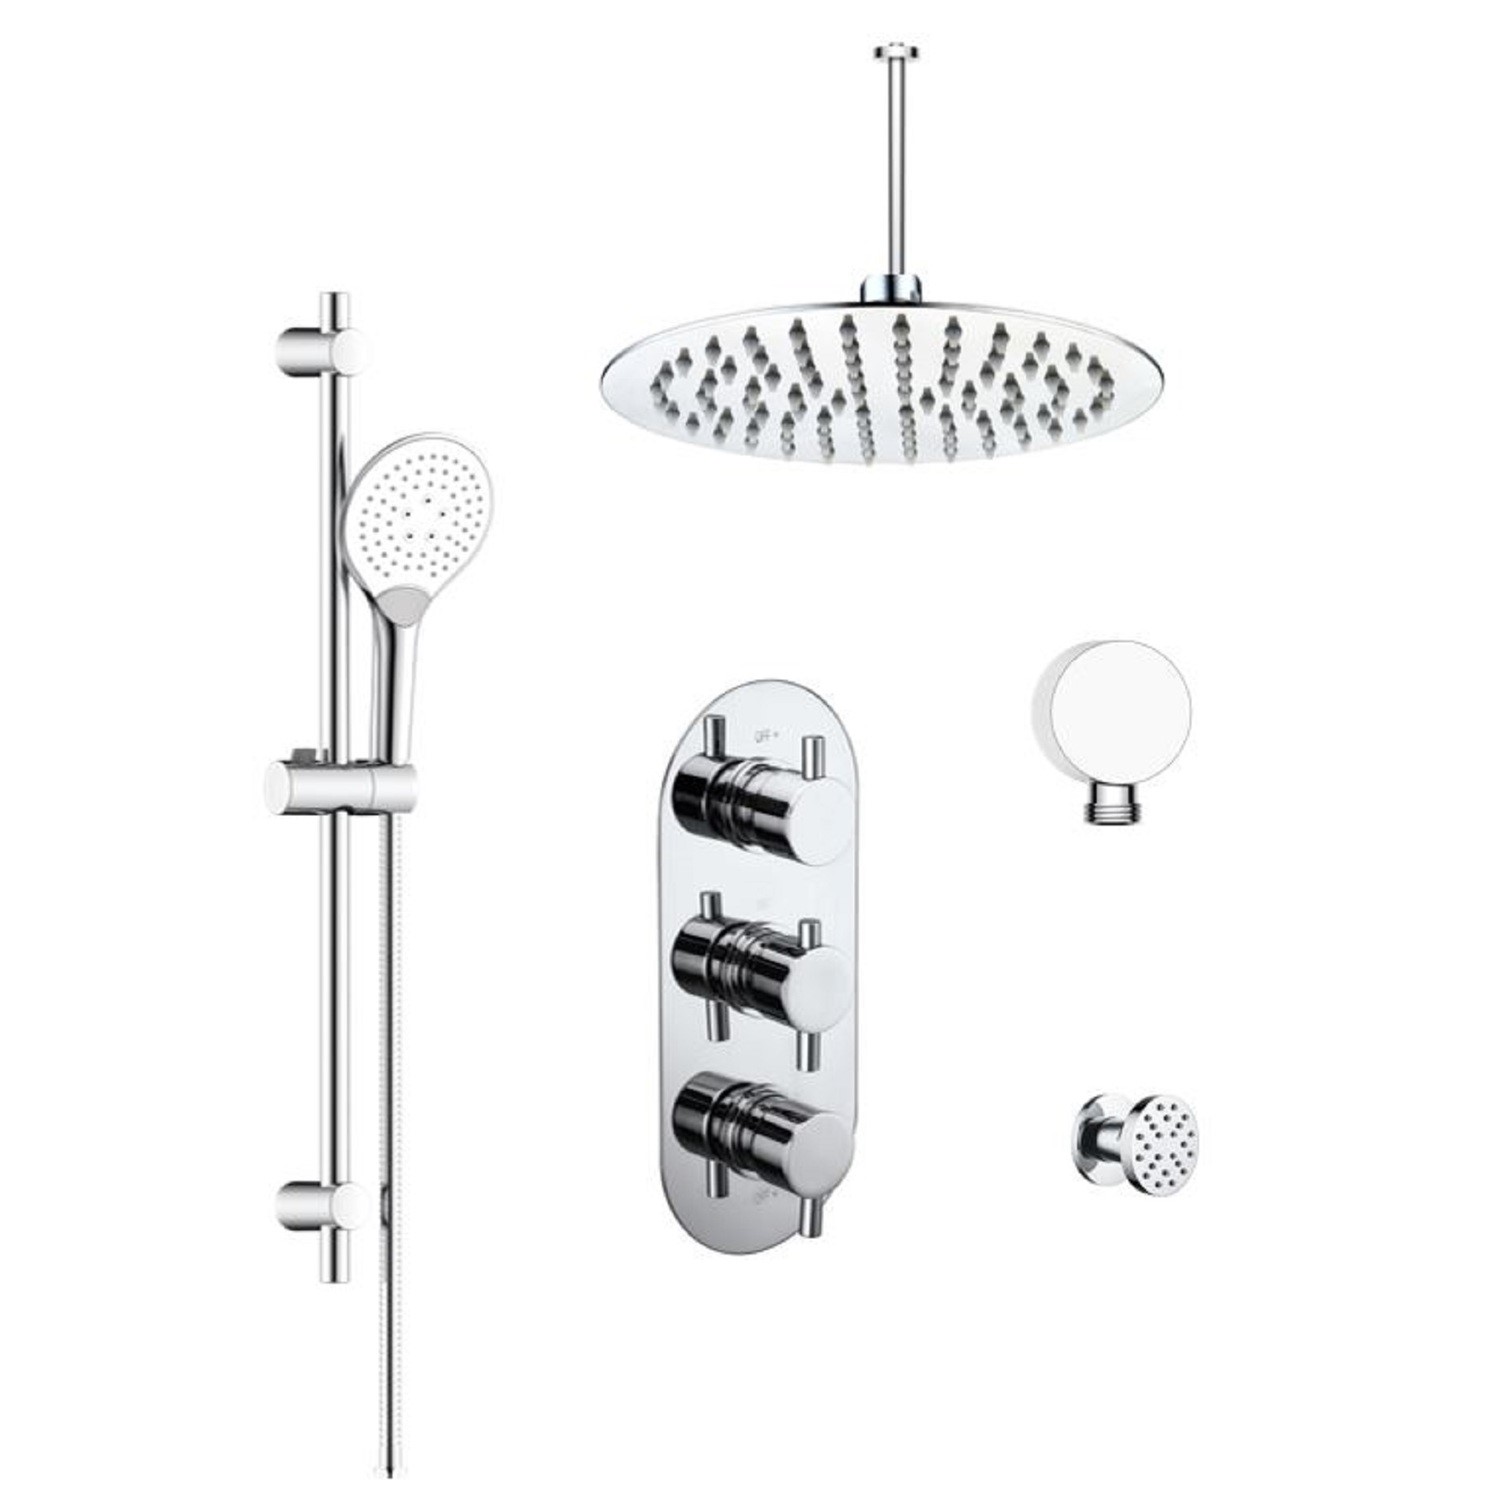 Concealed Thermostatic Mixer Shower with Slim Rainfall Overhead Handset & Body Jets - Flow